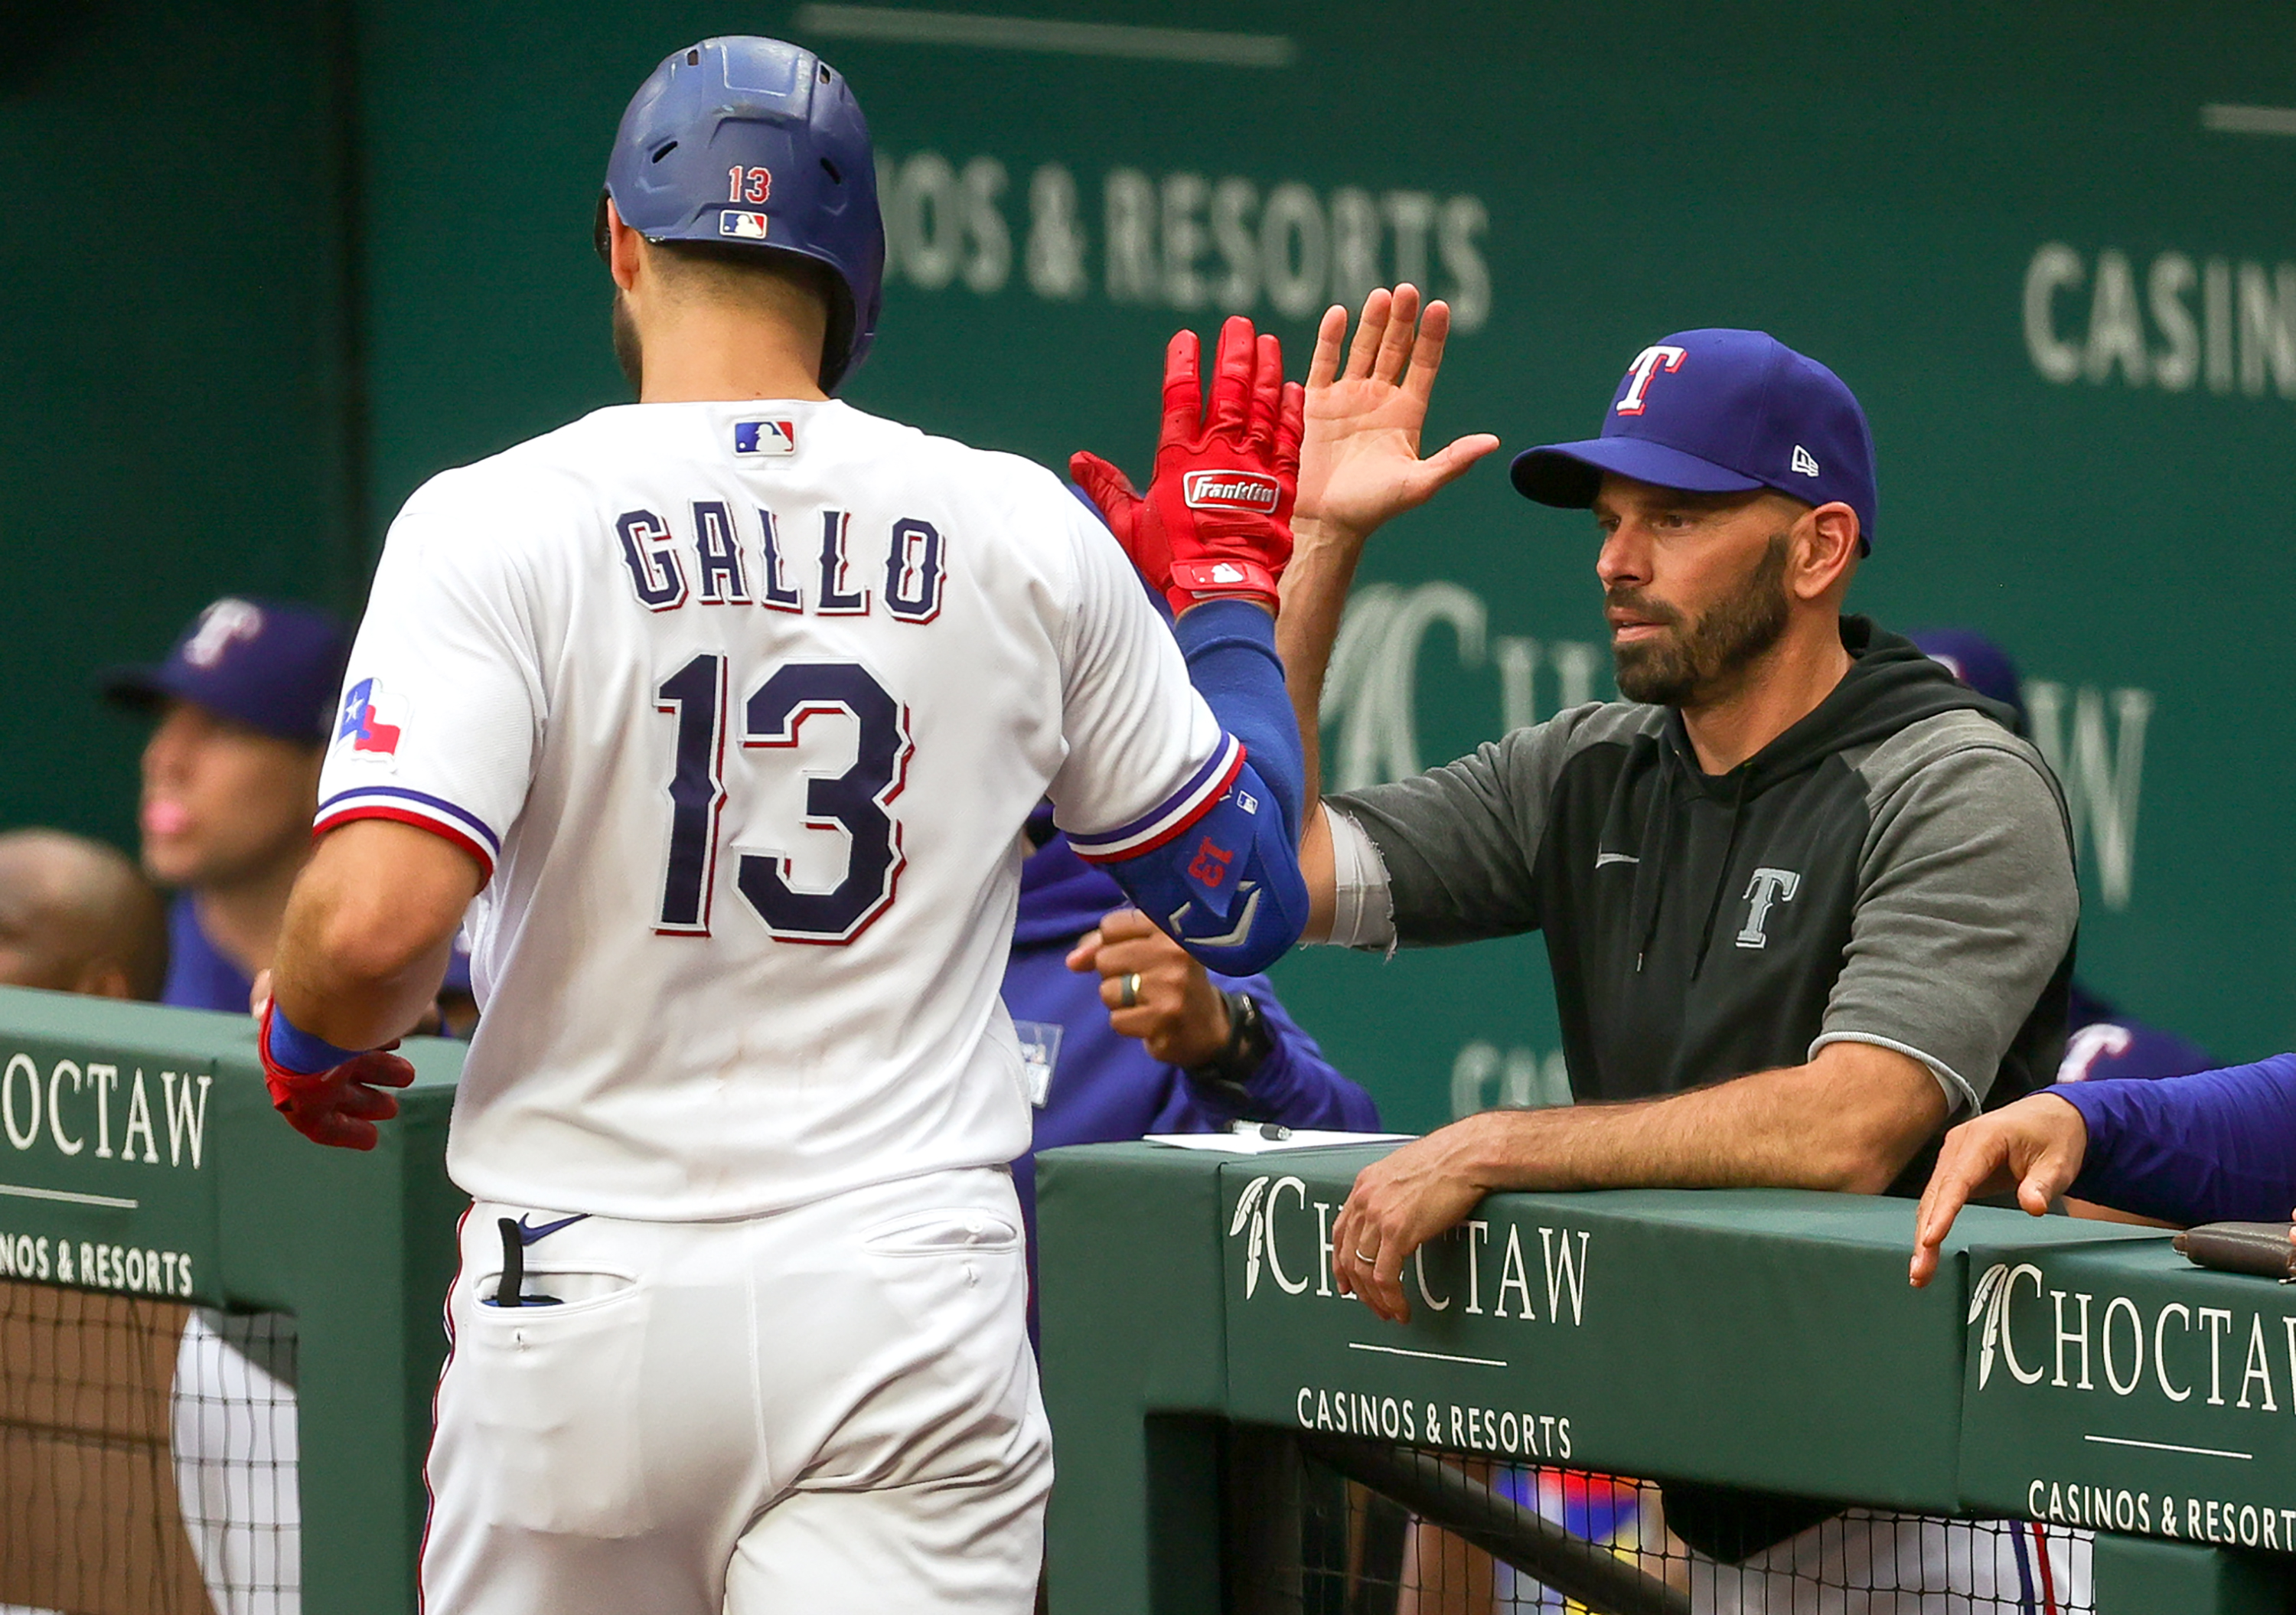 Joey Gallo happy for 'fresh start' after trade from Yankees